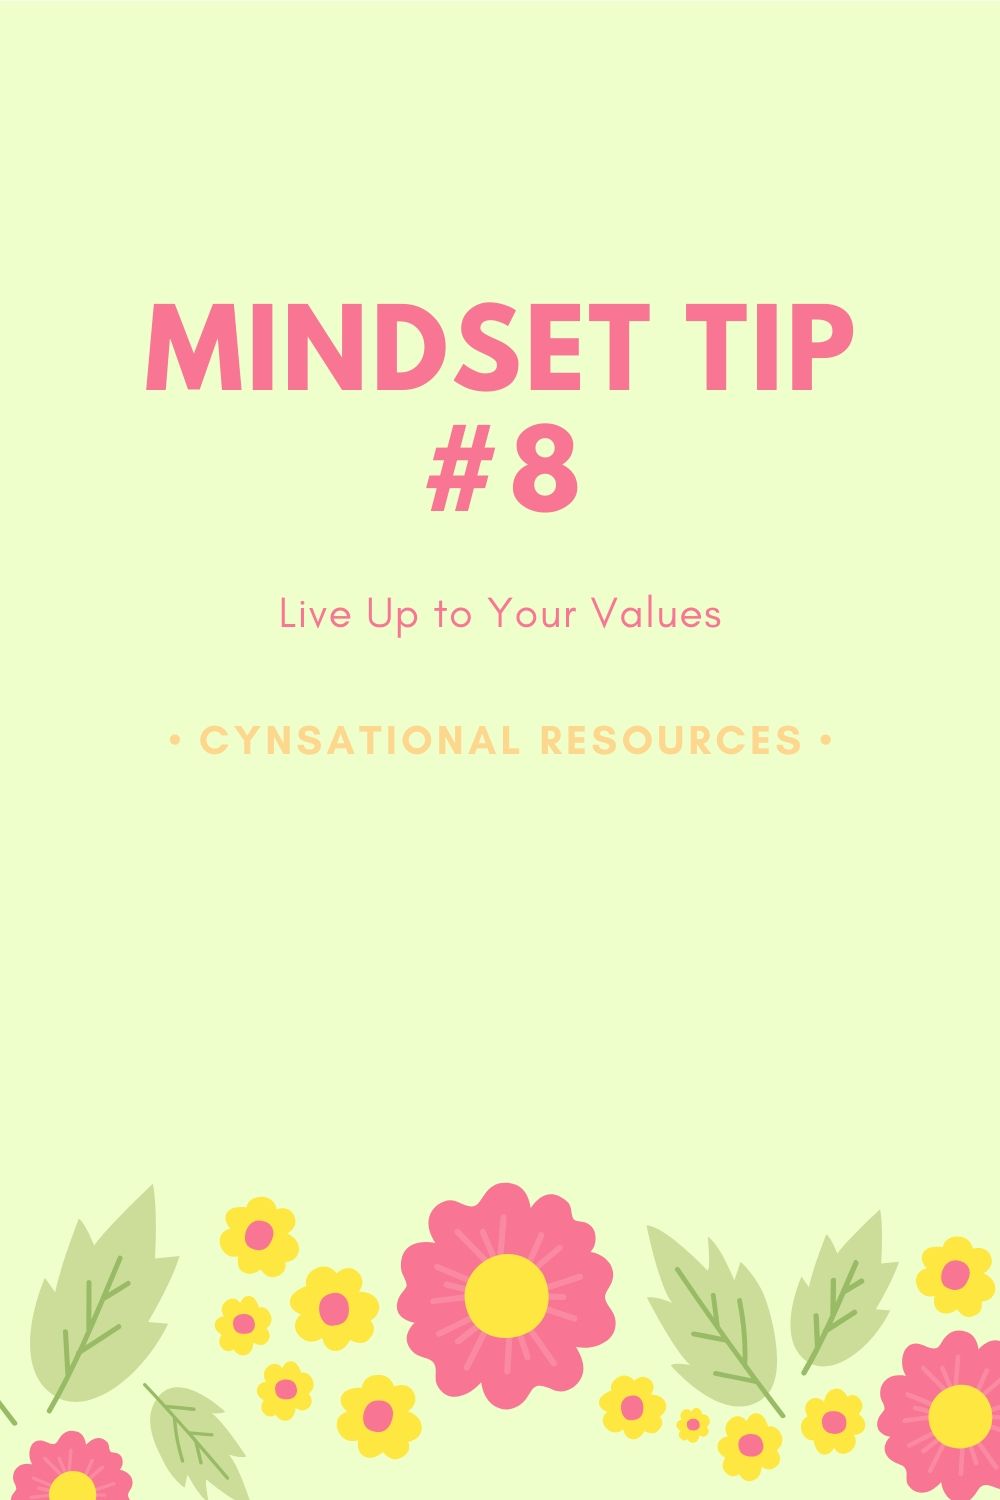 Mindset Tip #8: Live up to Your Values